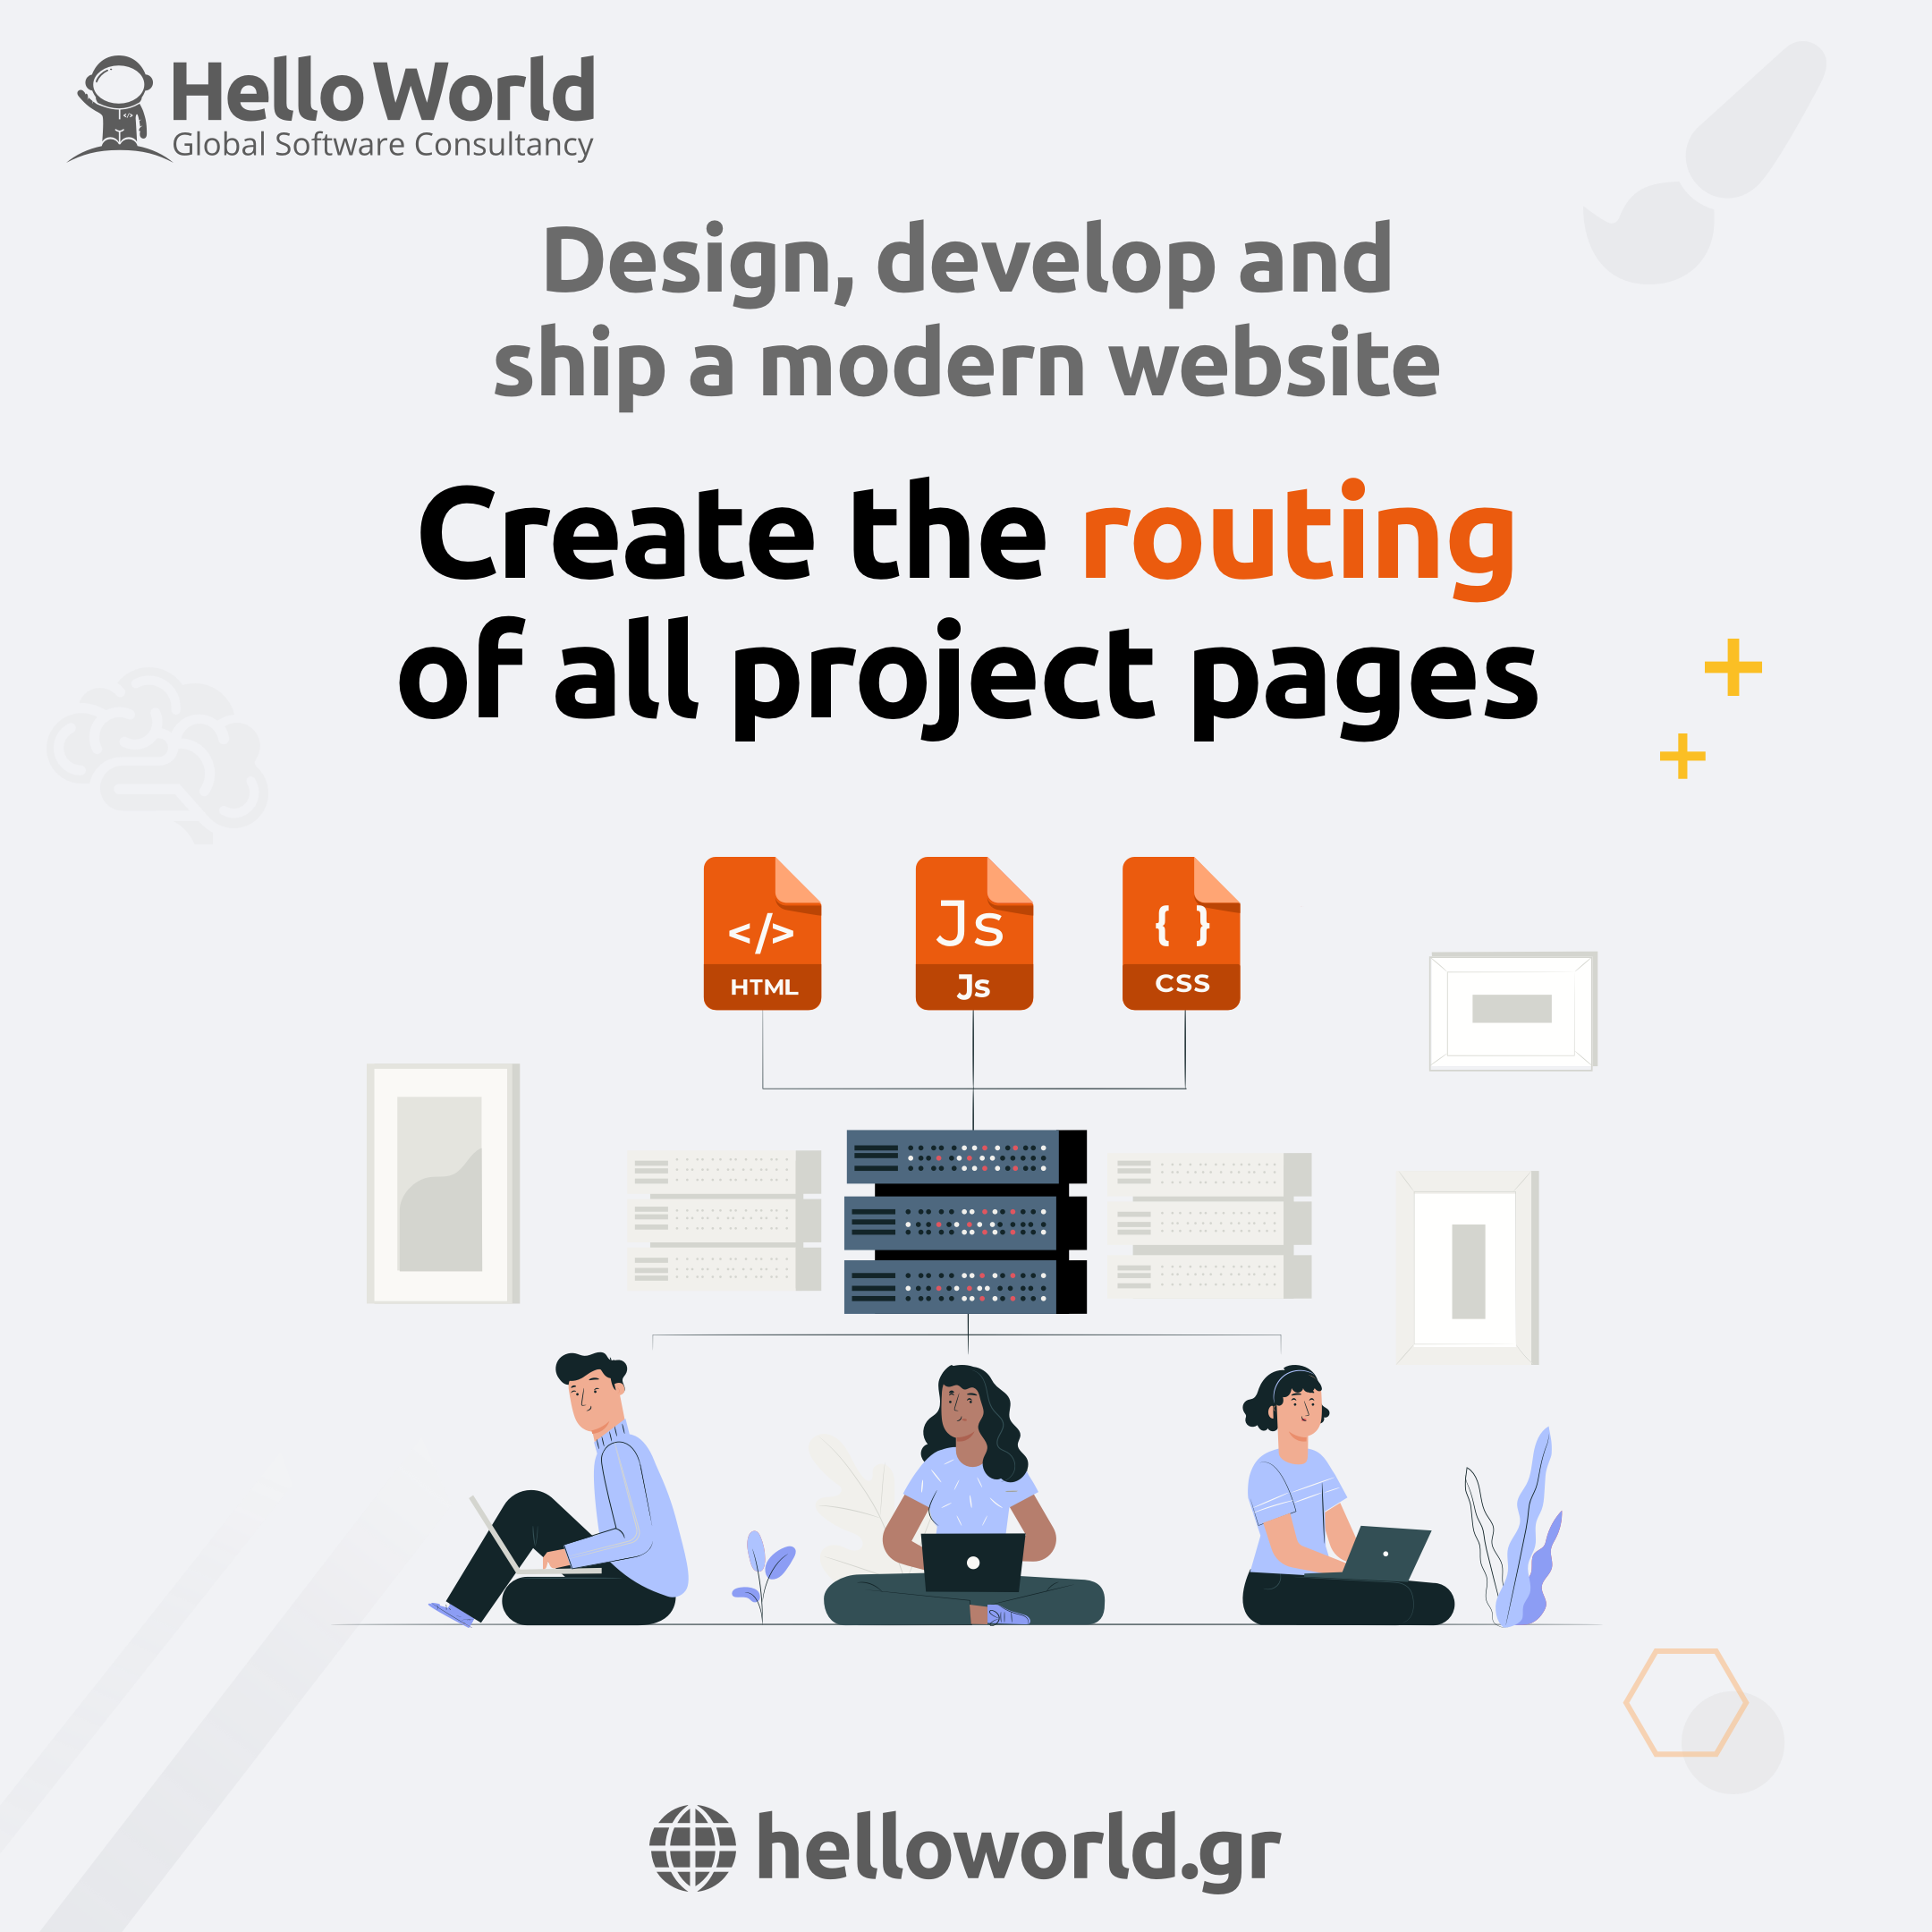 Modern Website: Create the routing of all project pages